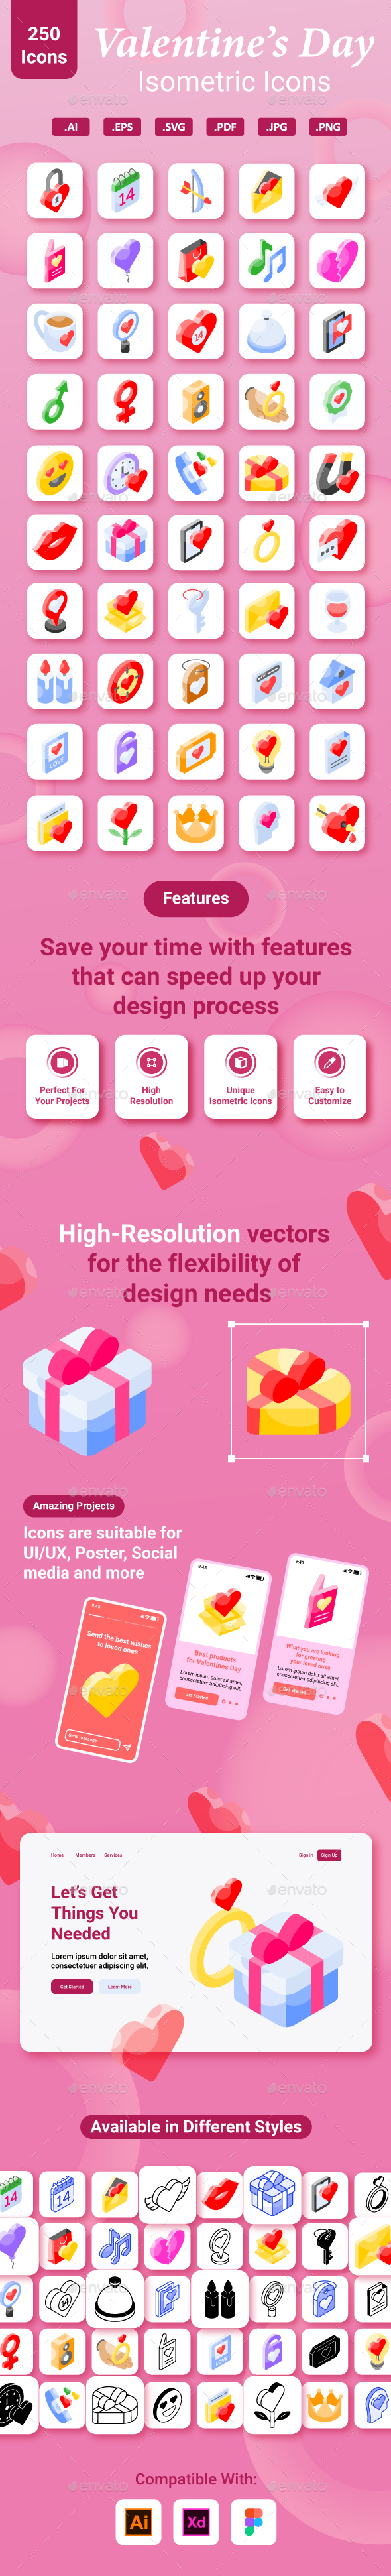 [DOWNLOAD]Valentines Day Isometric Icons